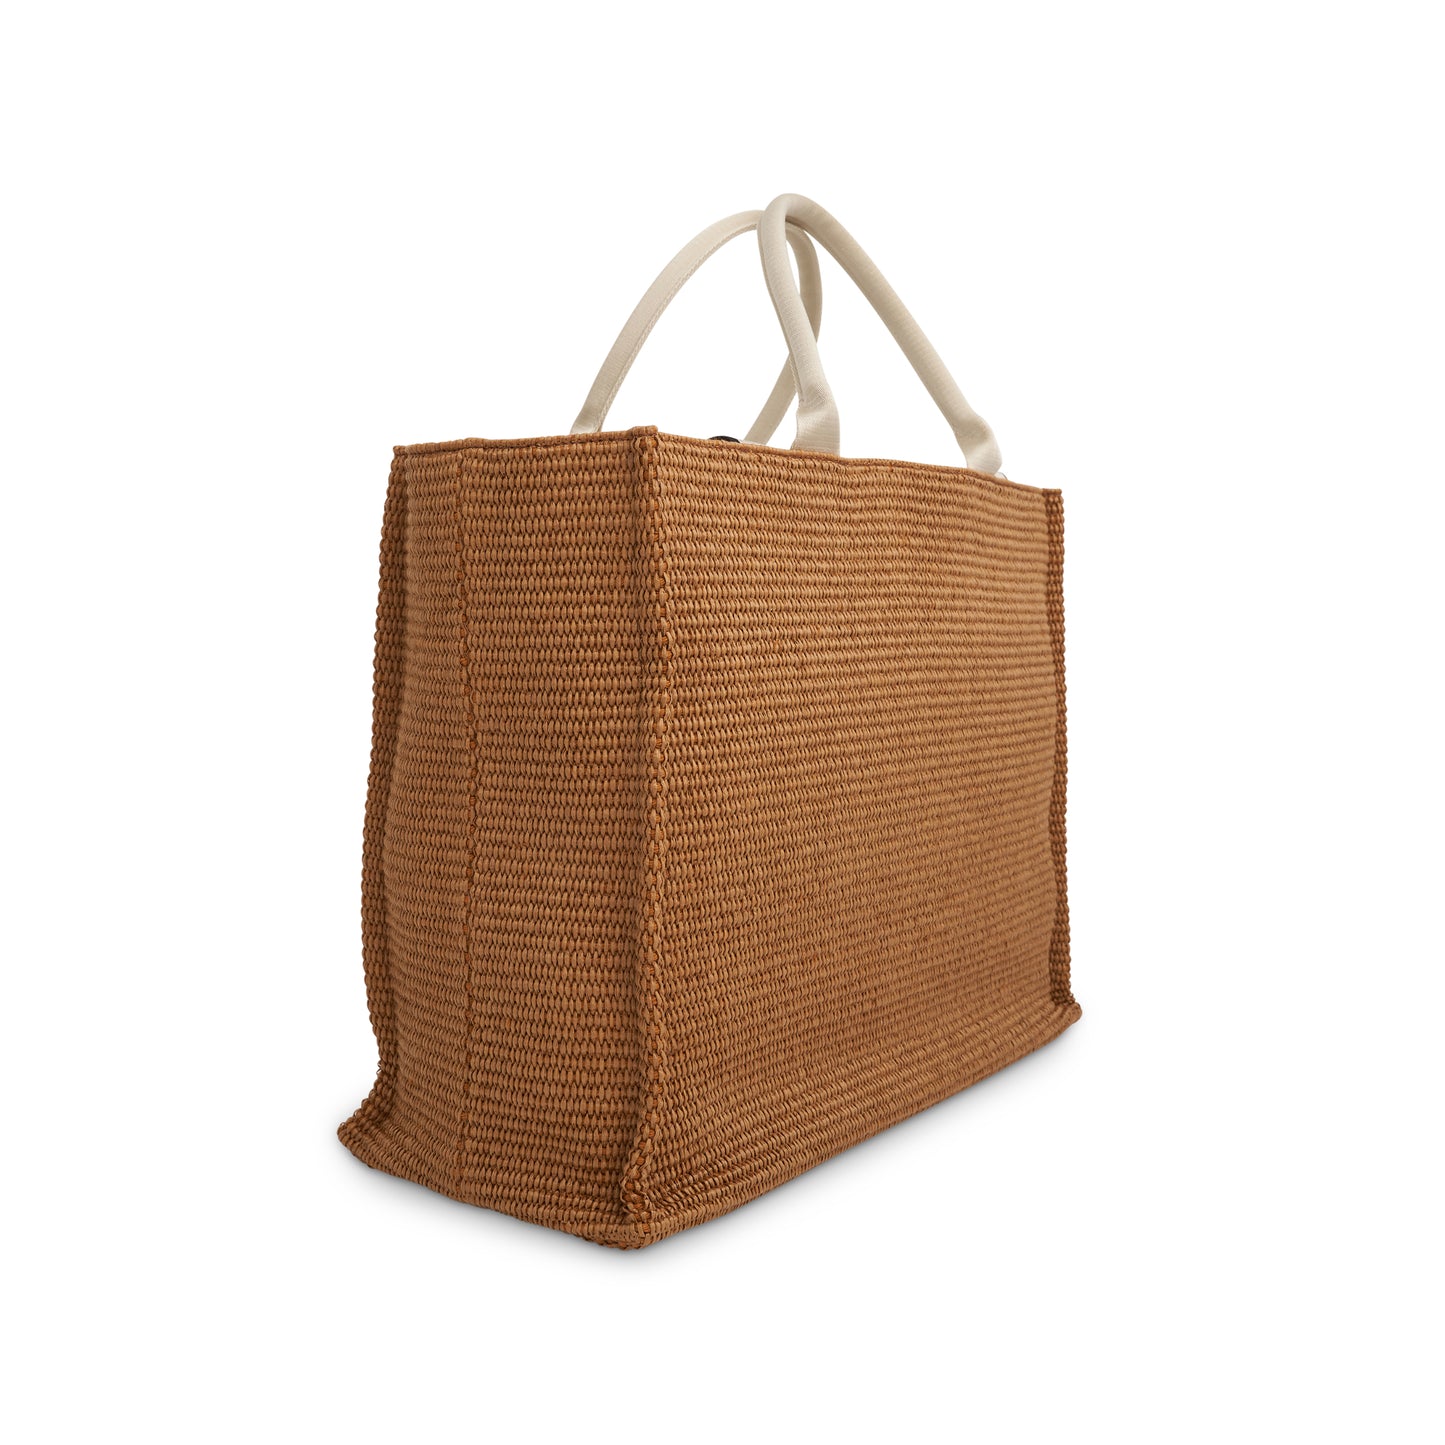 East West Tote Bag in Raw Sienna/Natural